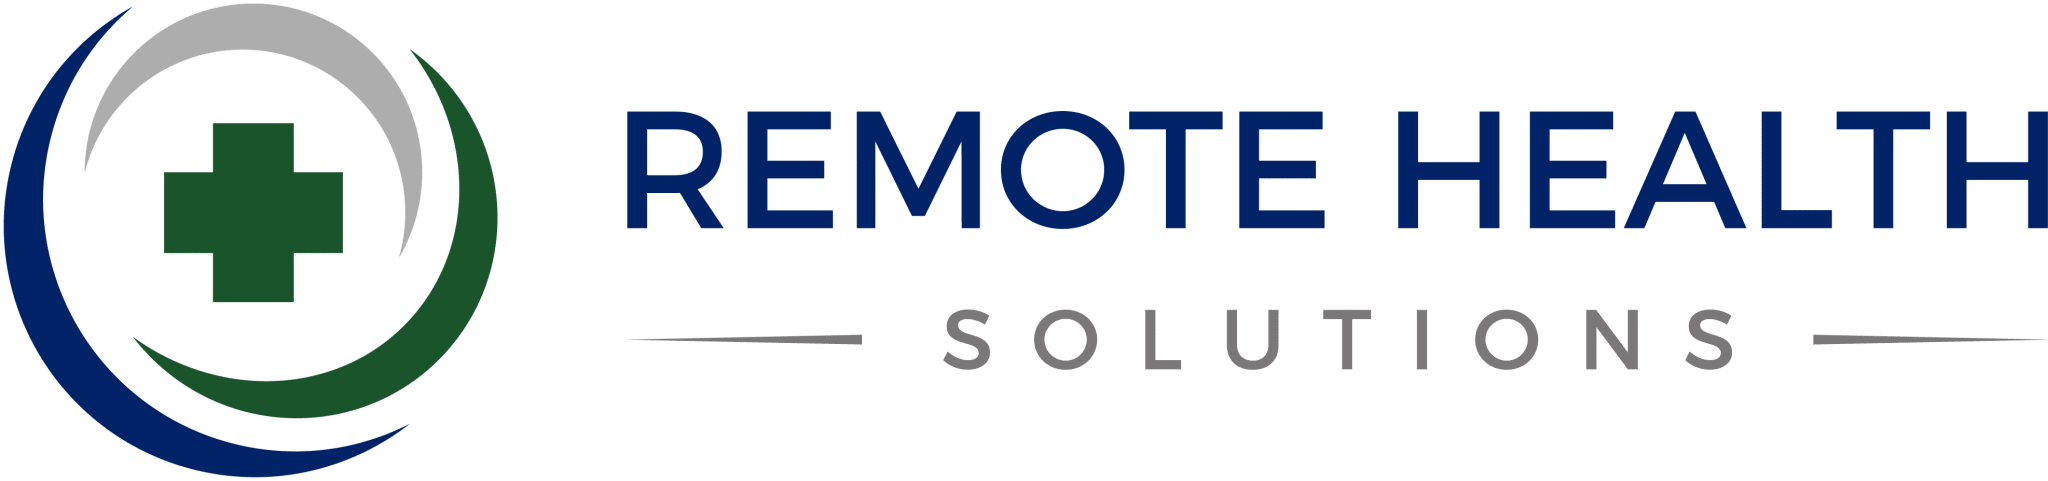 Remote Health Solutions